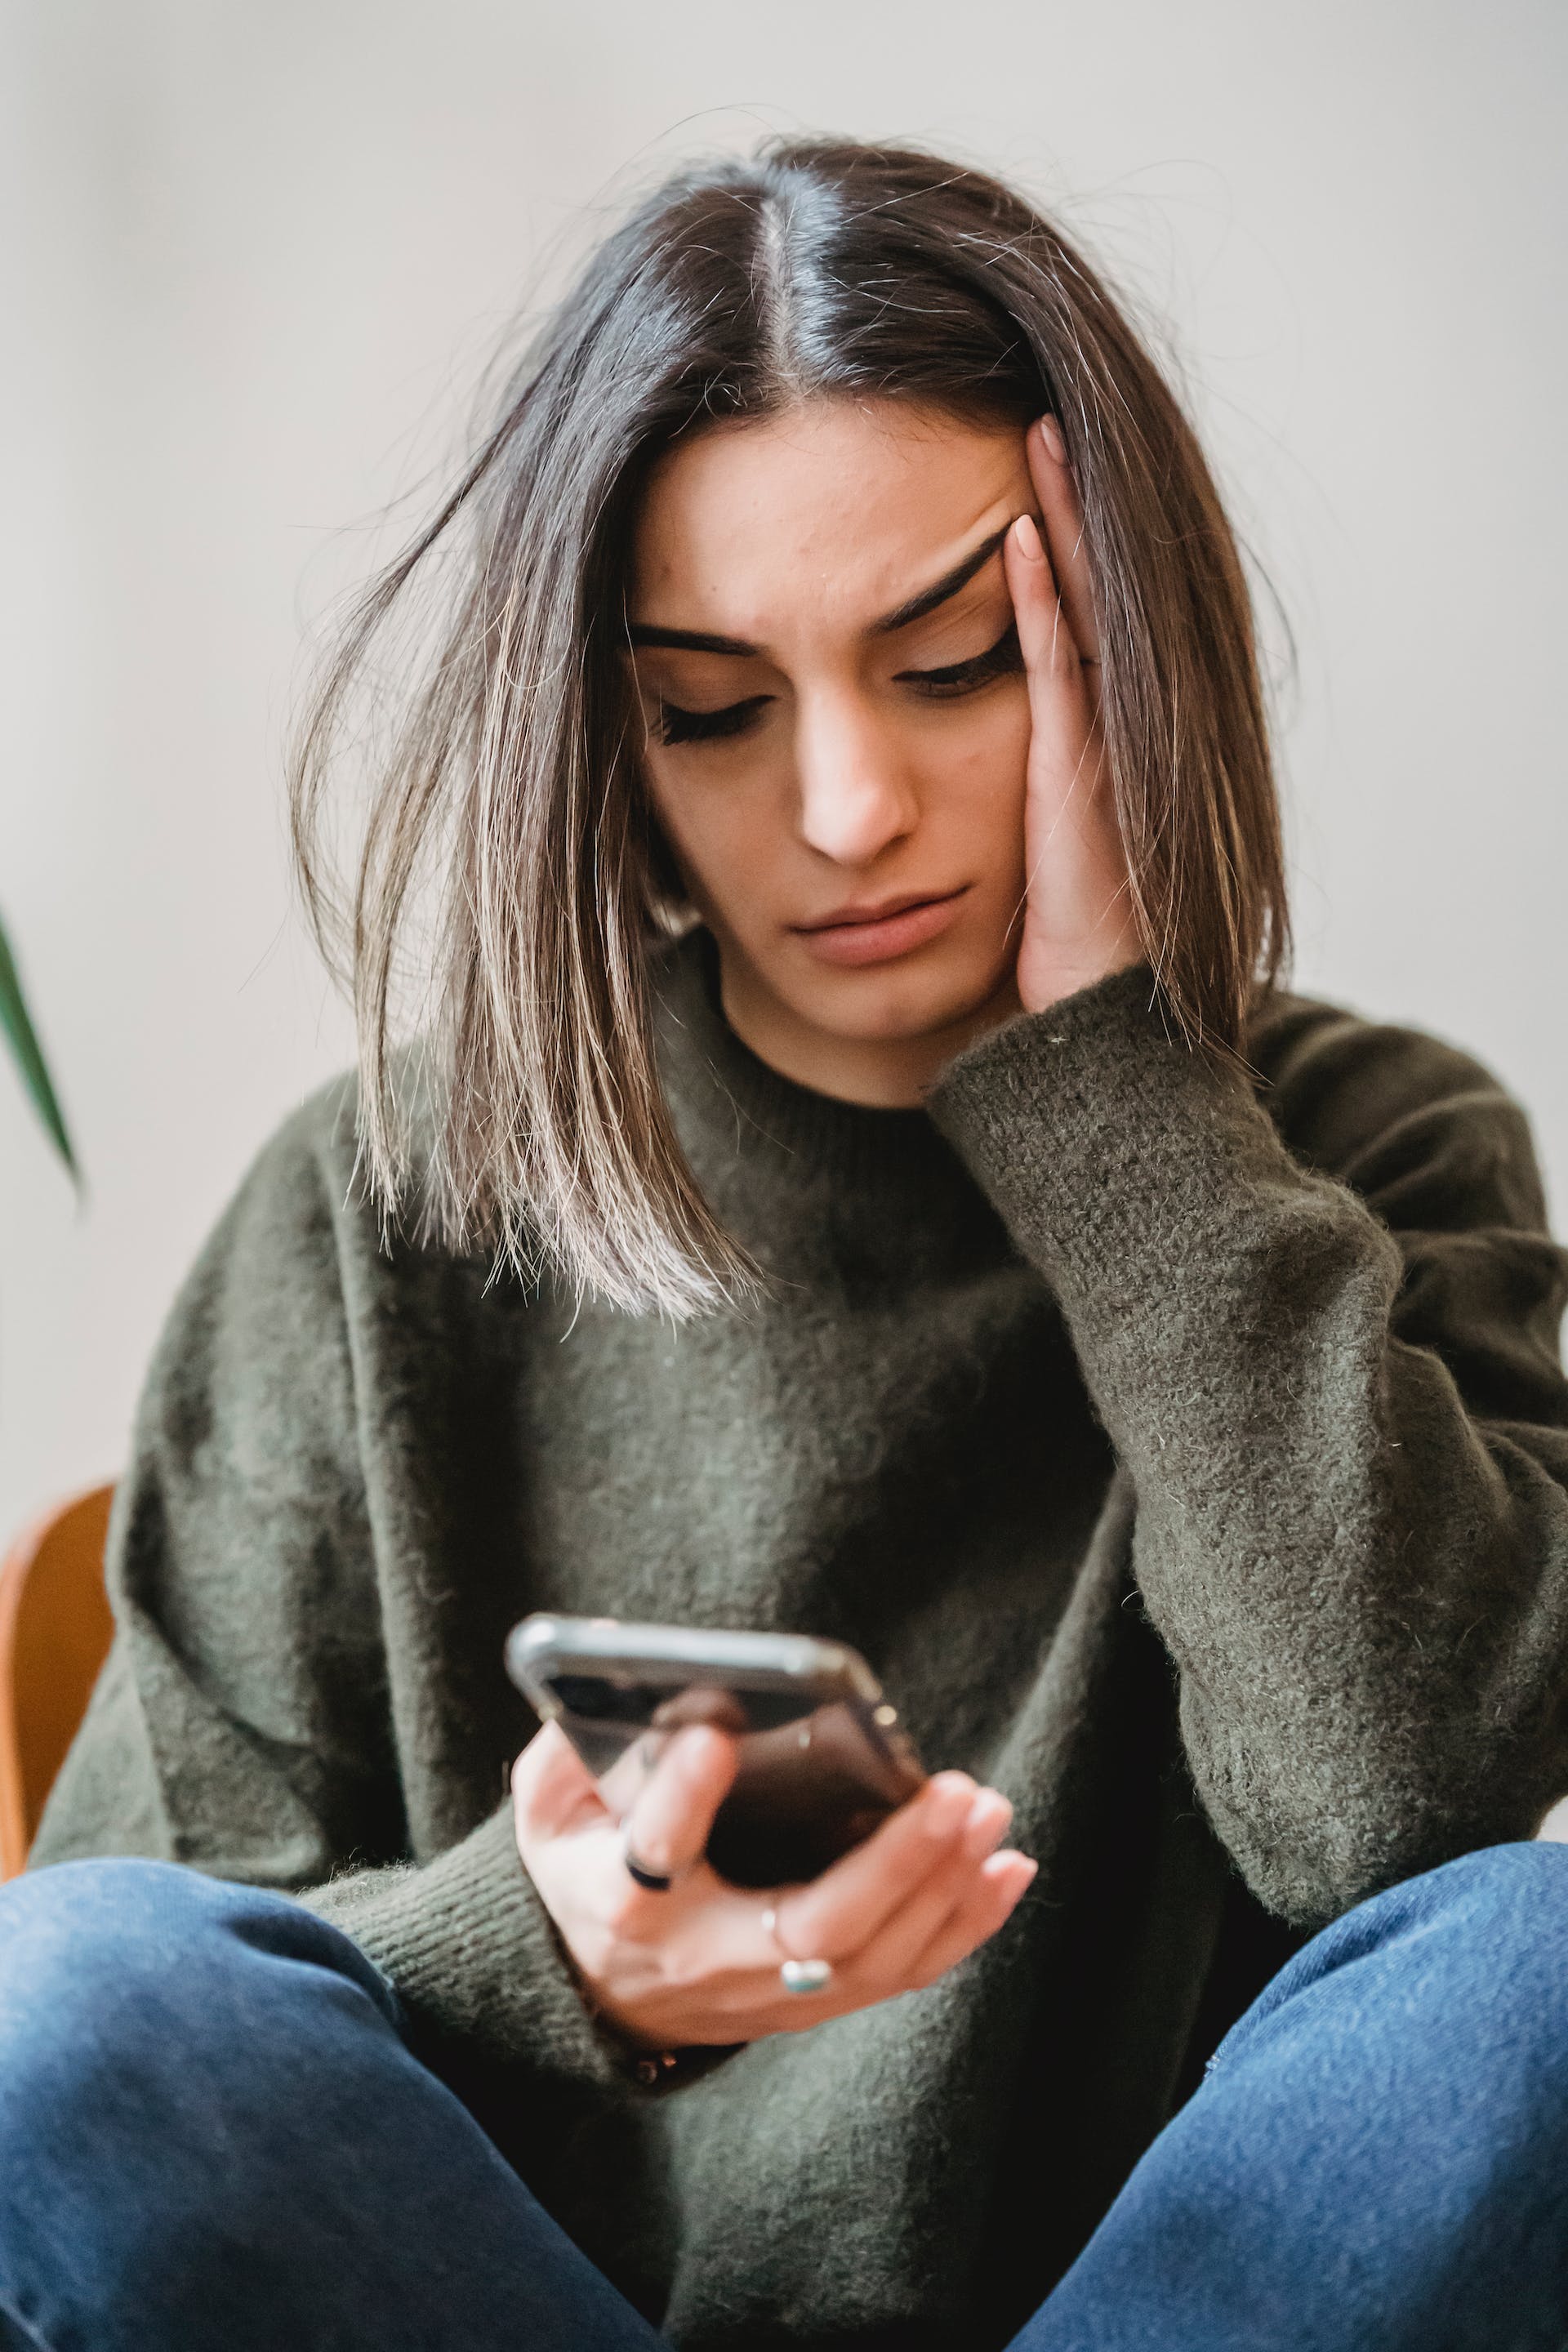 A concerned woman using a phone | Source: Pexels